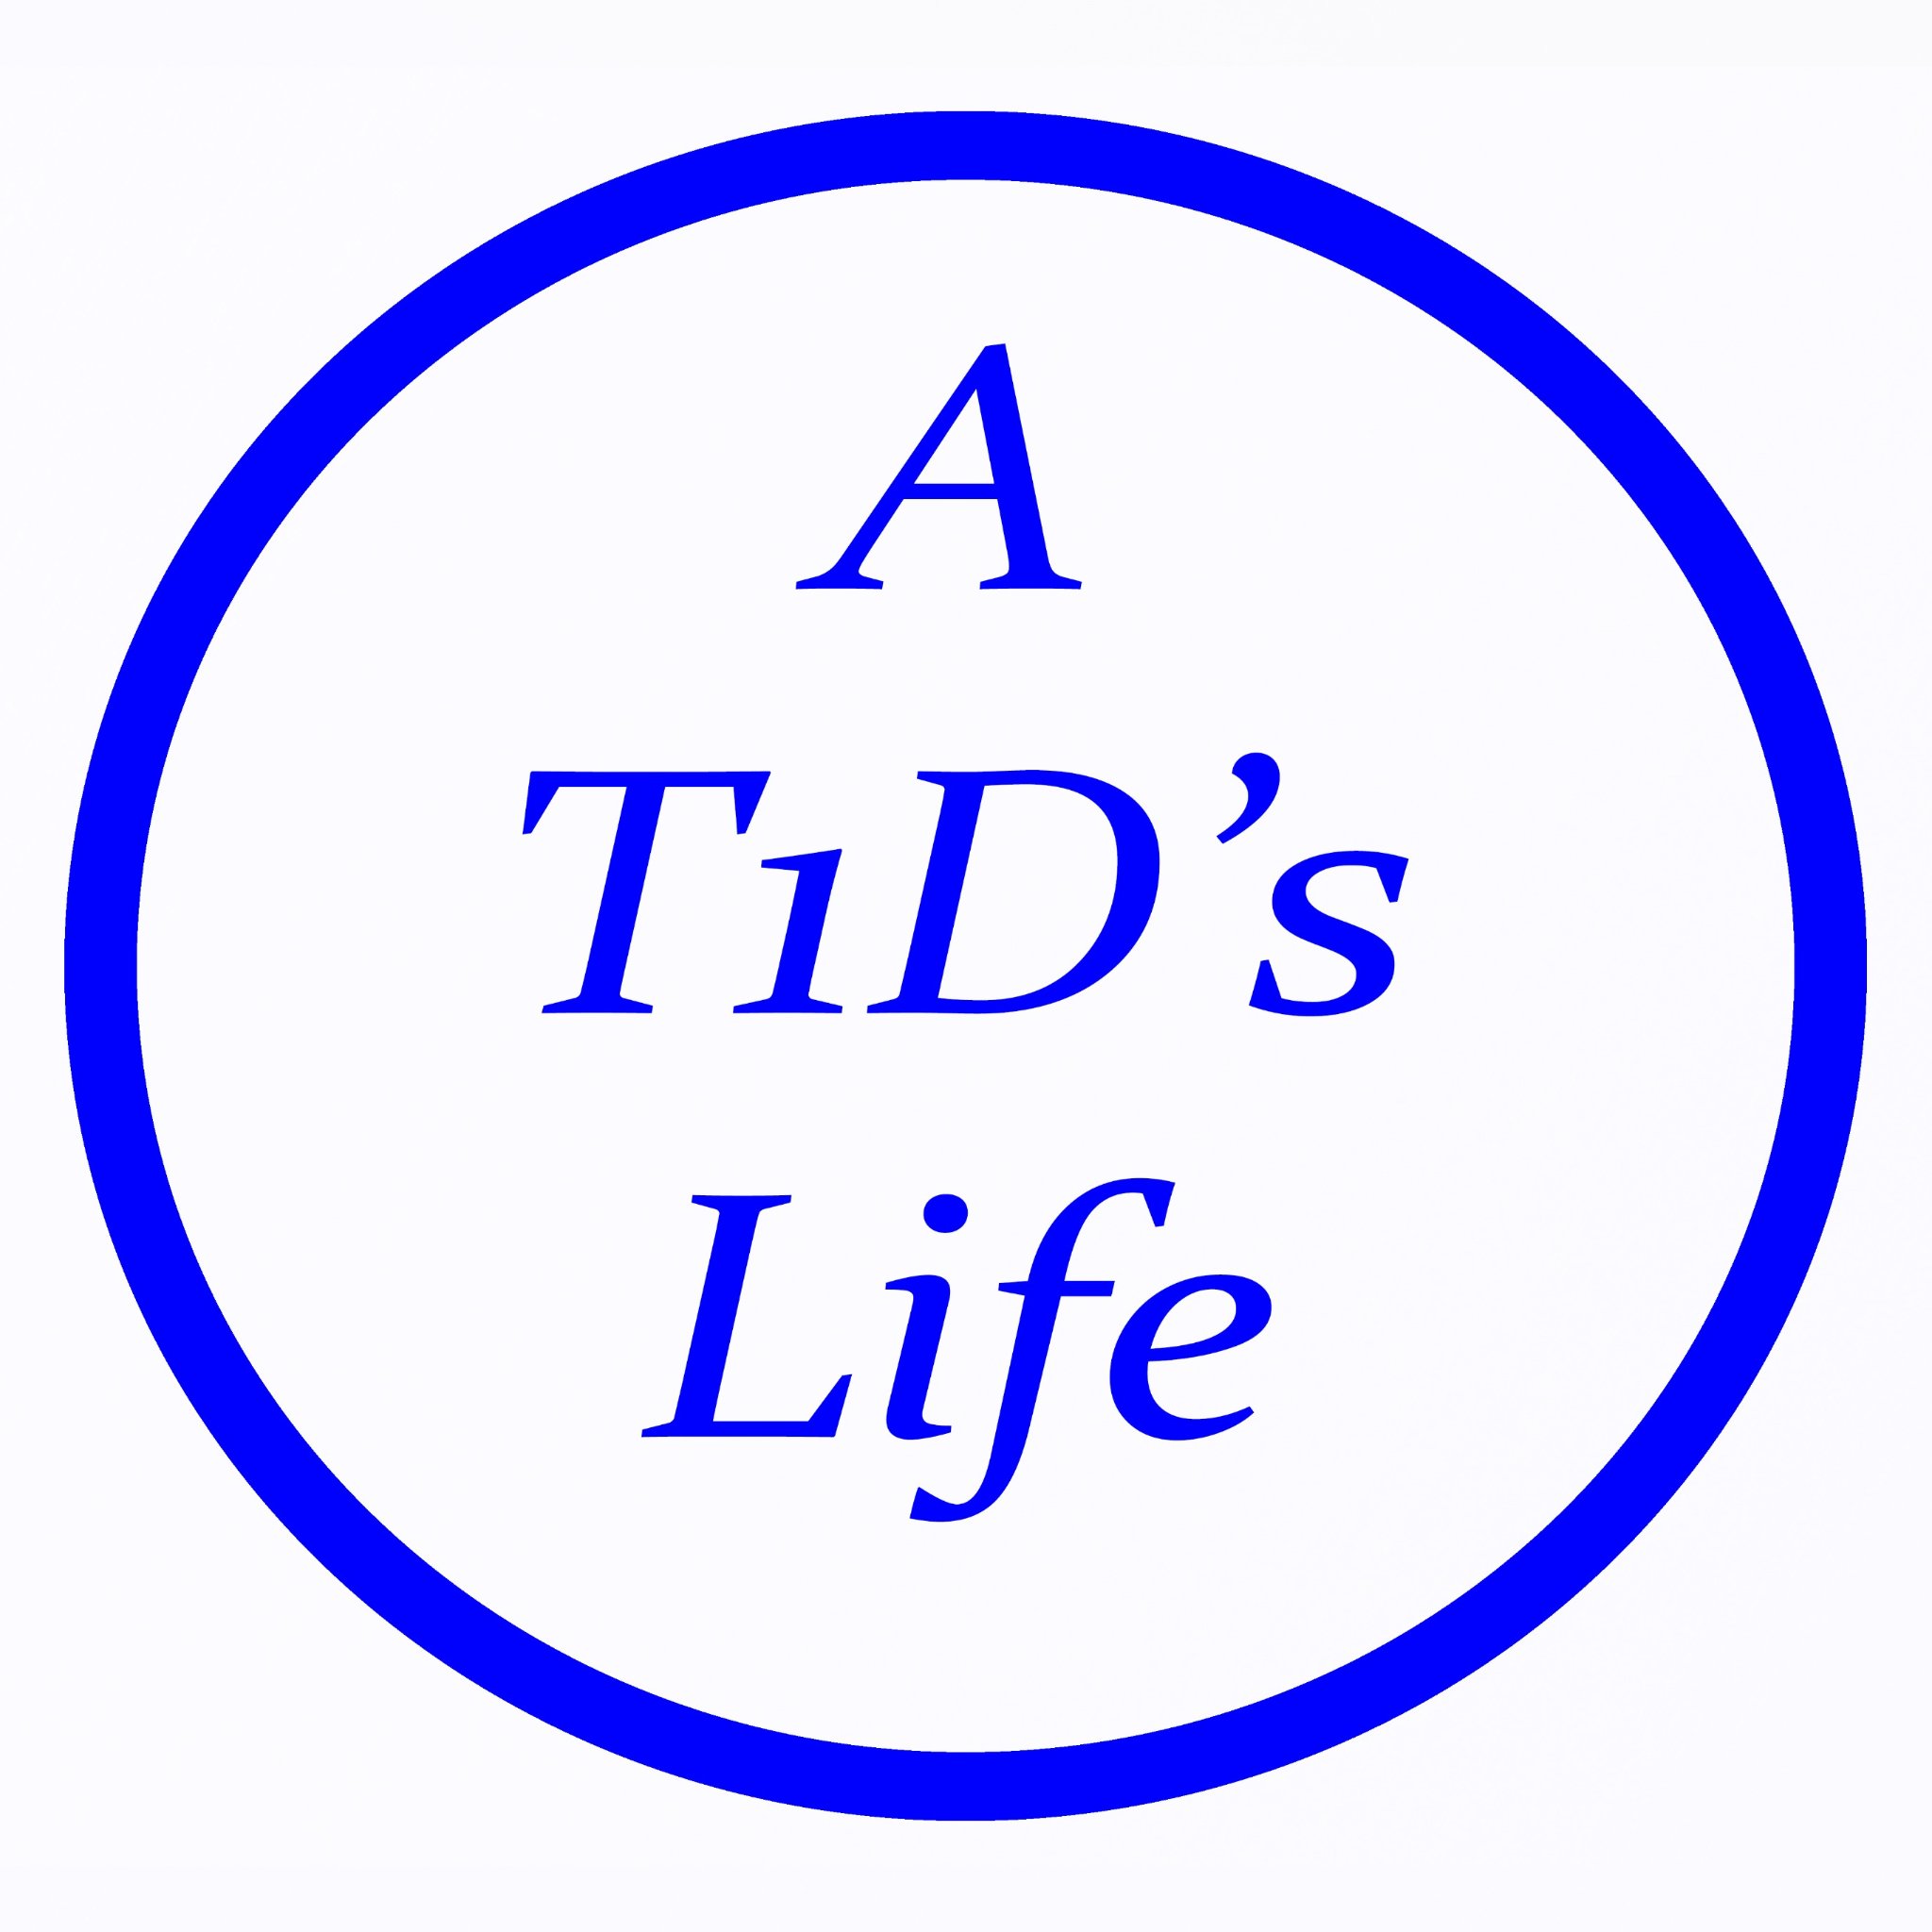 A student documentary about what it is like to live with Type One Diabetes. Real life stories of people diagnosed with Type One Diabetes.